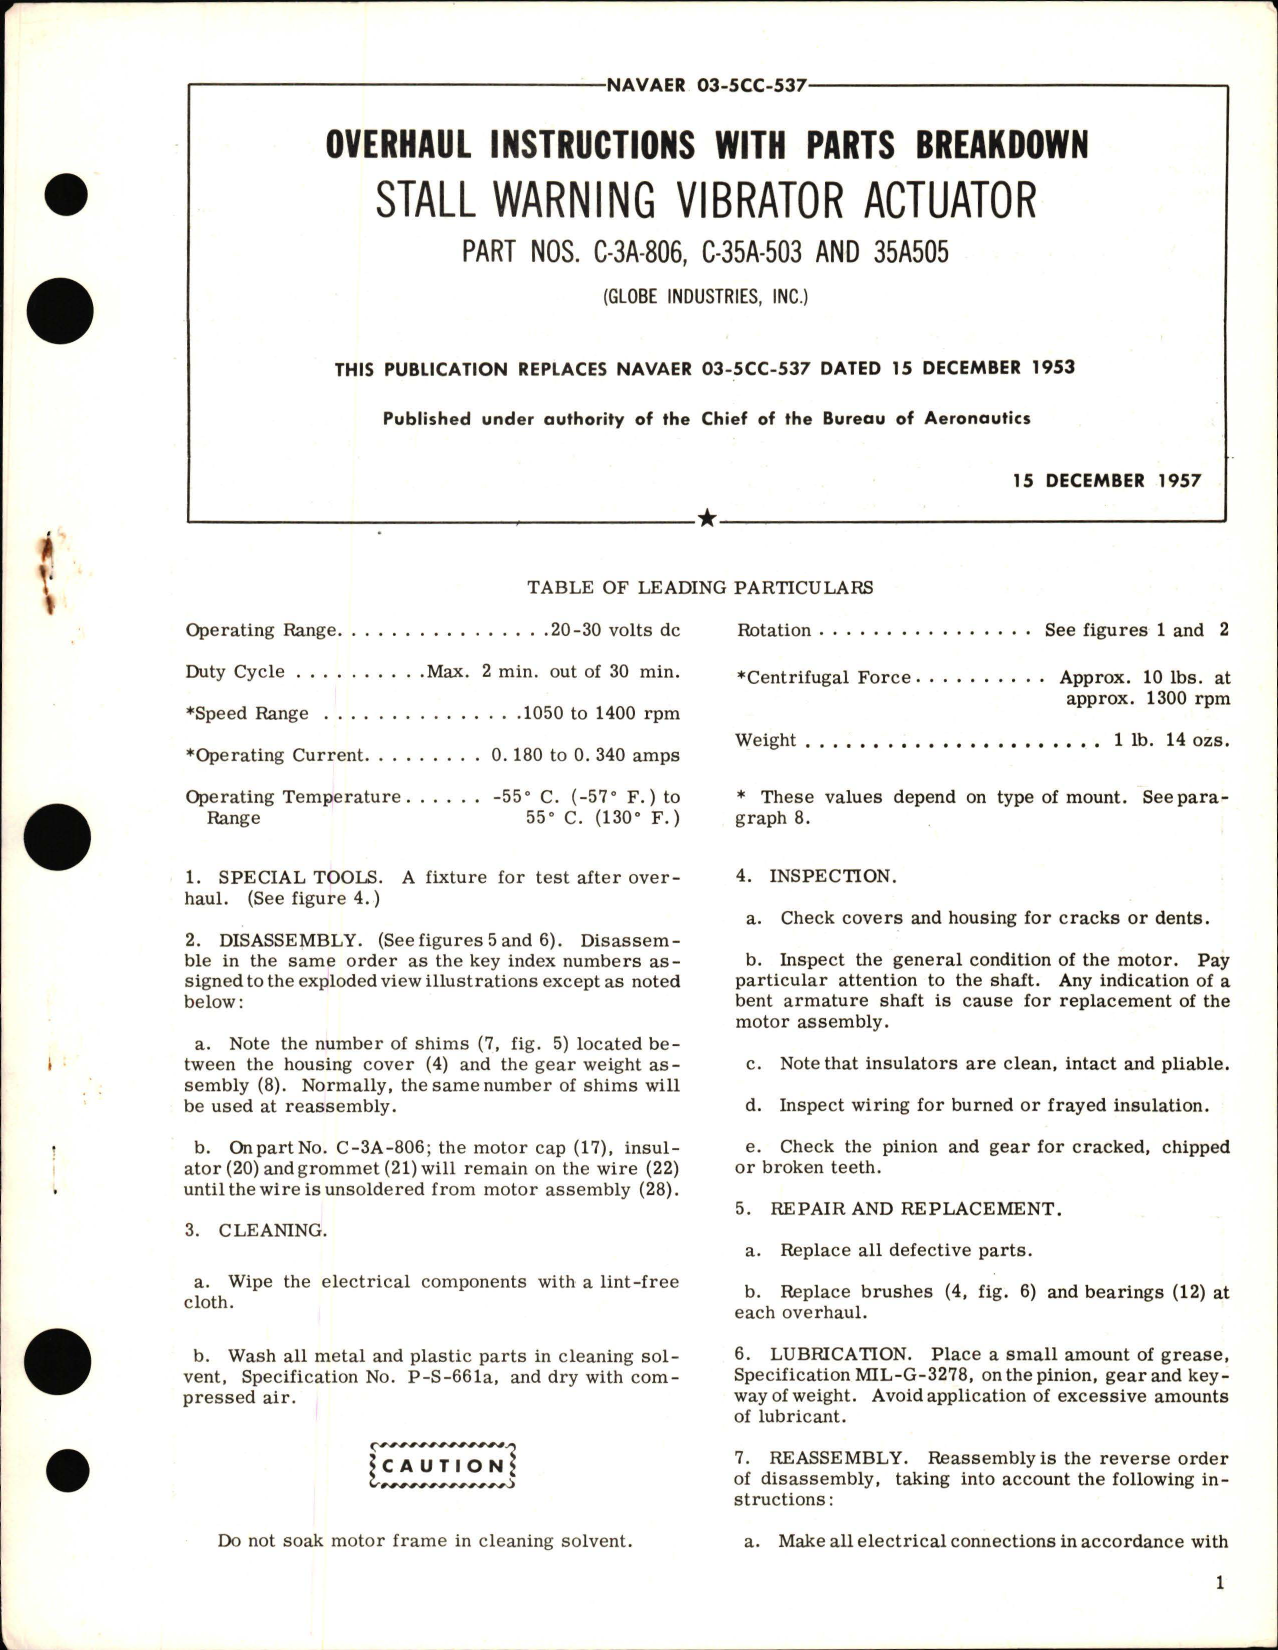 Sample page 1 from AirCorps Library document: Overhaul Instructions with Parts Breakdown for Stall Warning Vibrator Actuator - Part C-3A-806, C-35A-503 and 35A505 